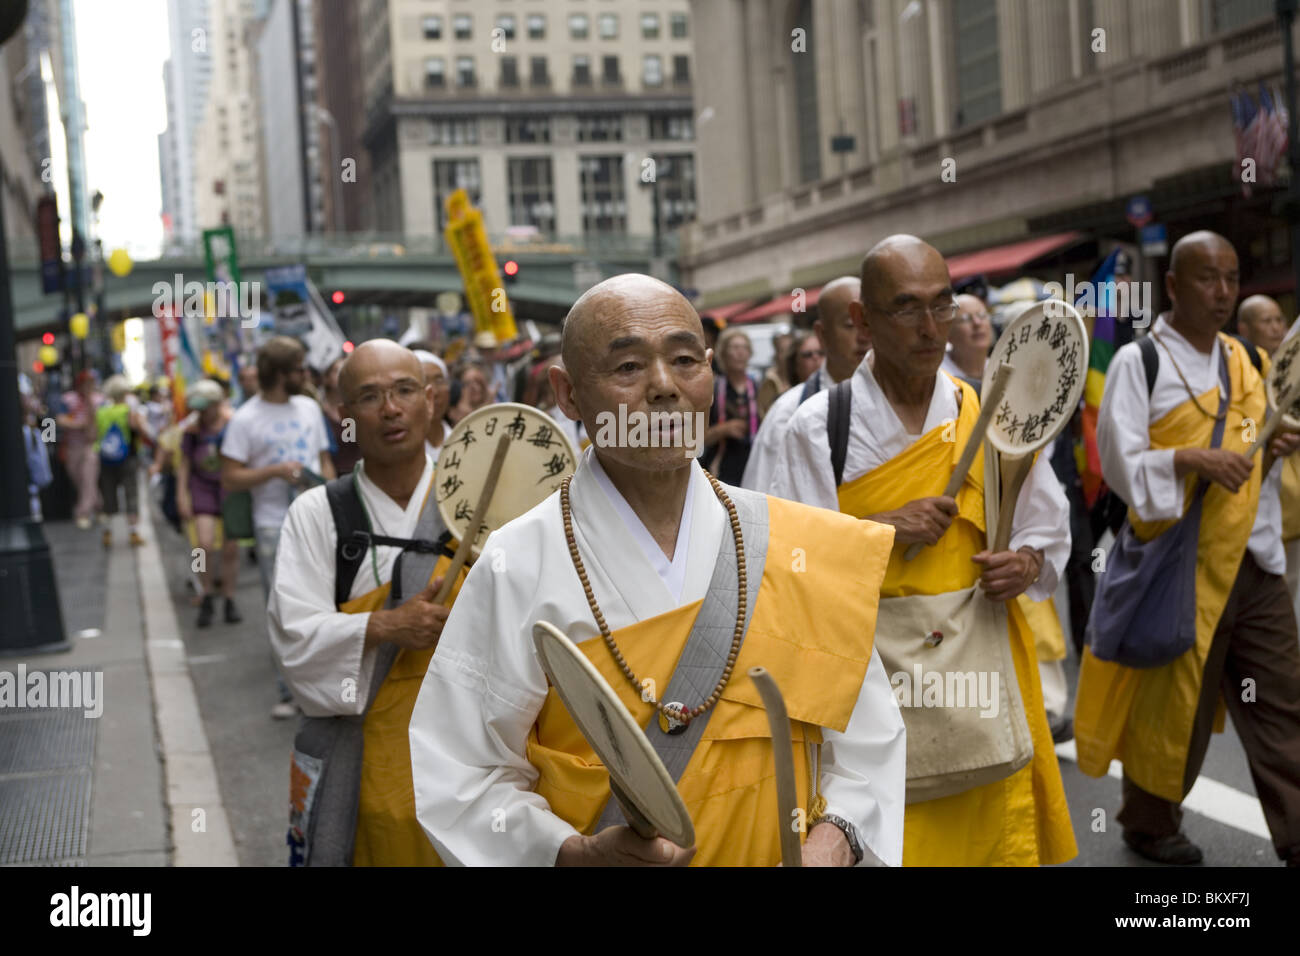 May 2, 2010: International anti-nuclear weapons demonstration and peace march to the United Nations in New York City. Stock Photo